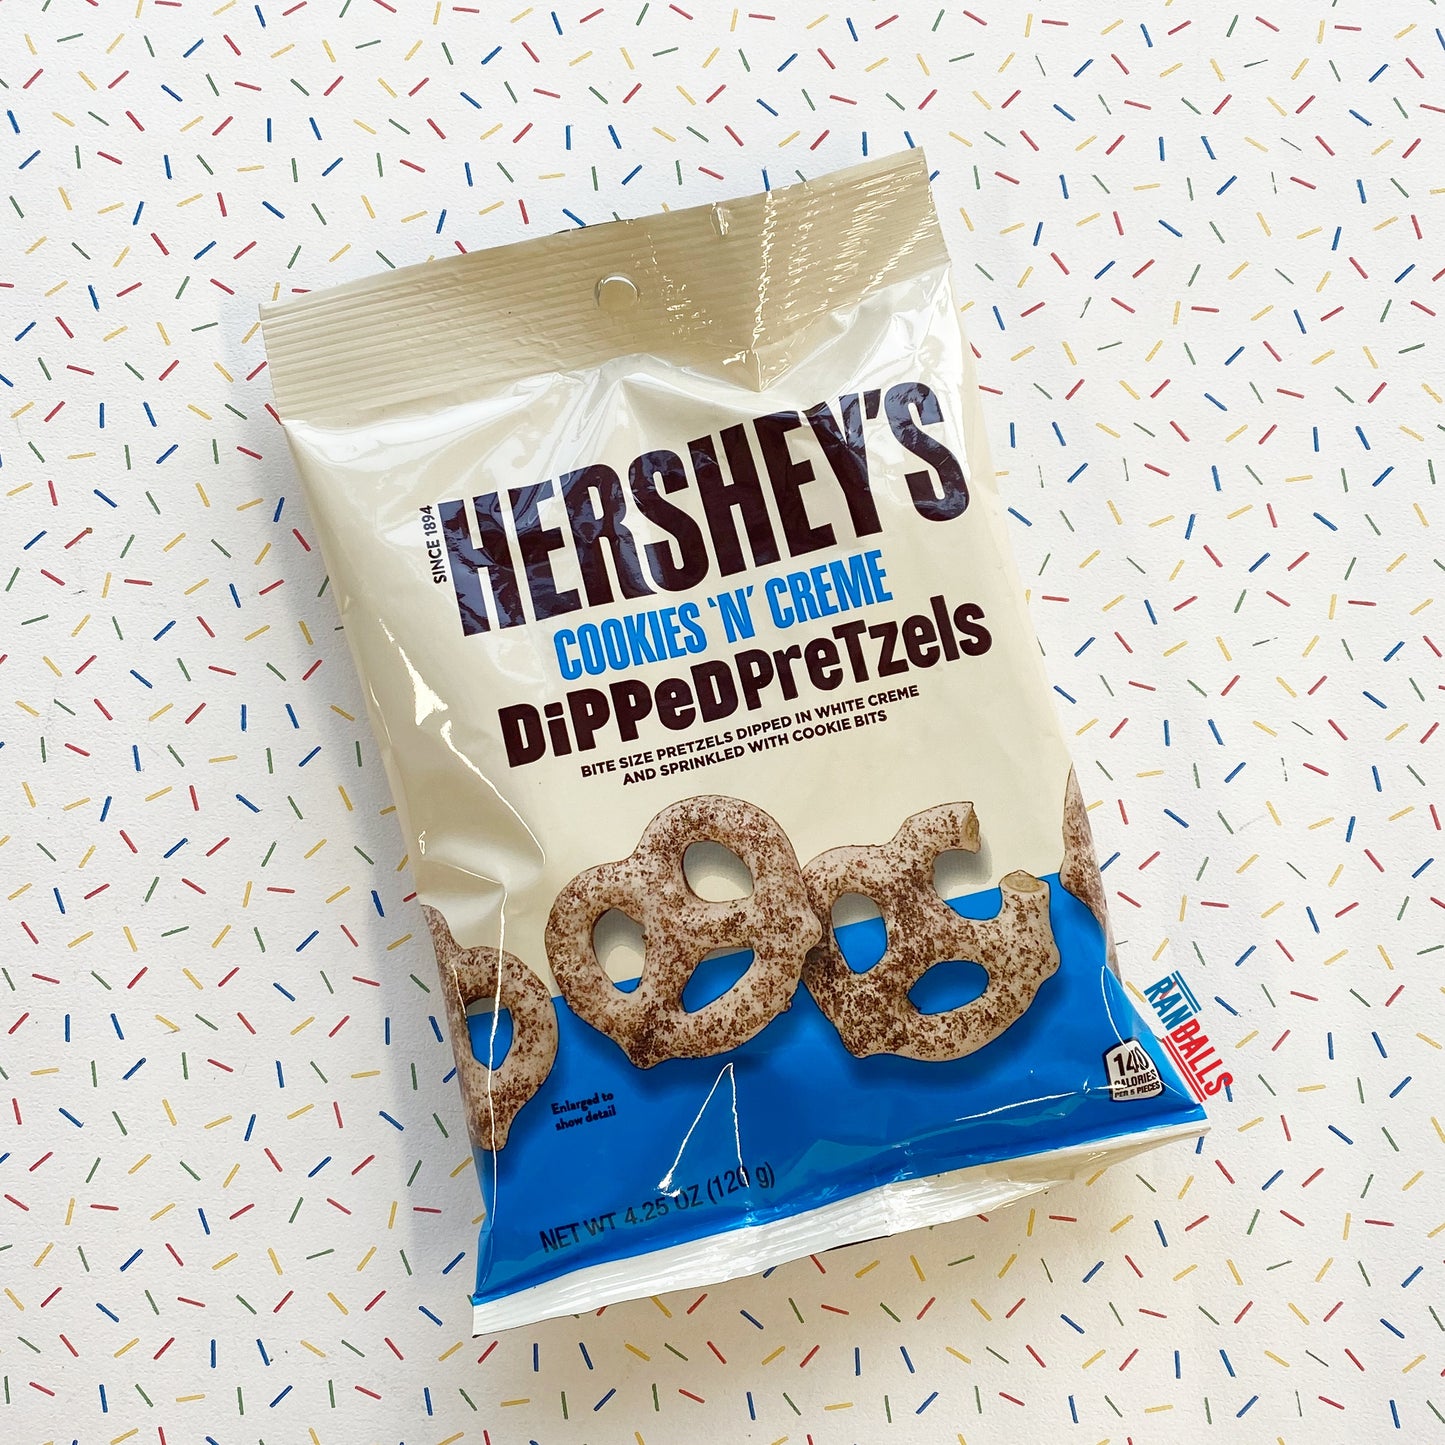 hershey's dipped pretzels cookies 'n' creme, chocolate, crunchy cookie pieces, snack, sweet, usa, randalls